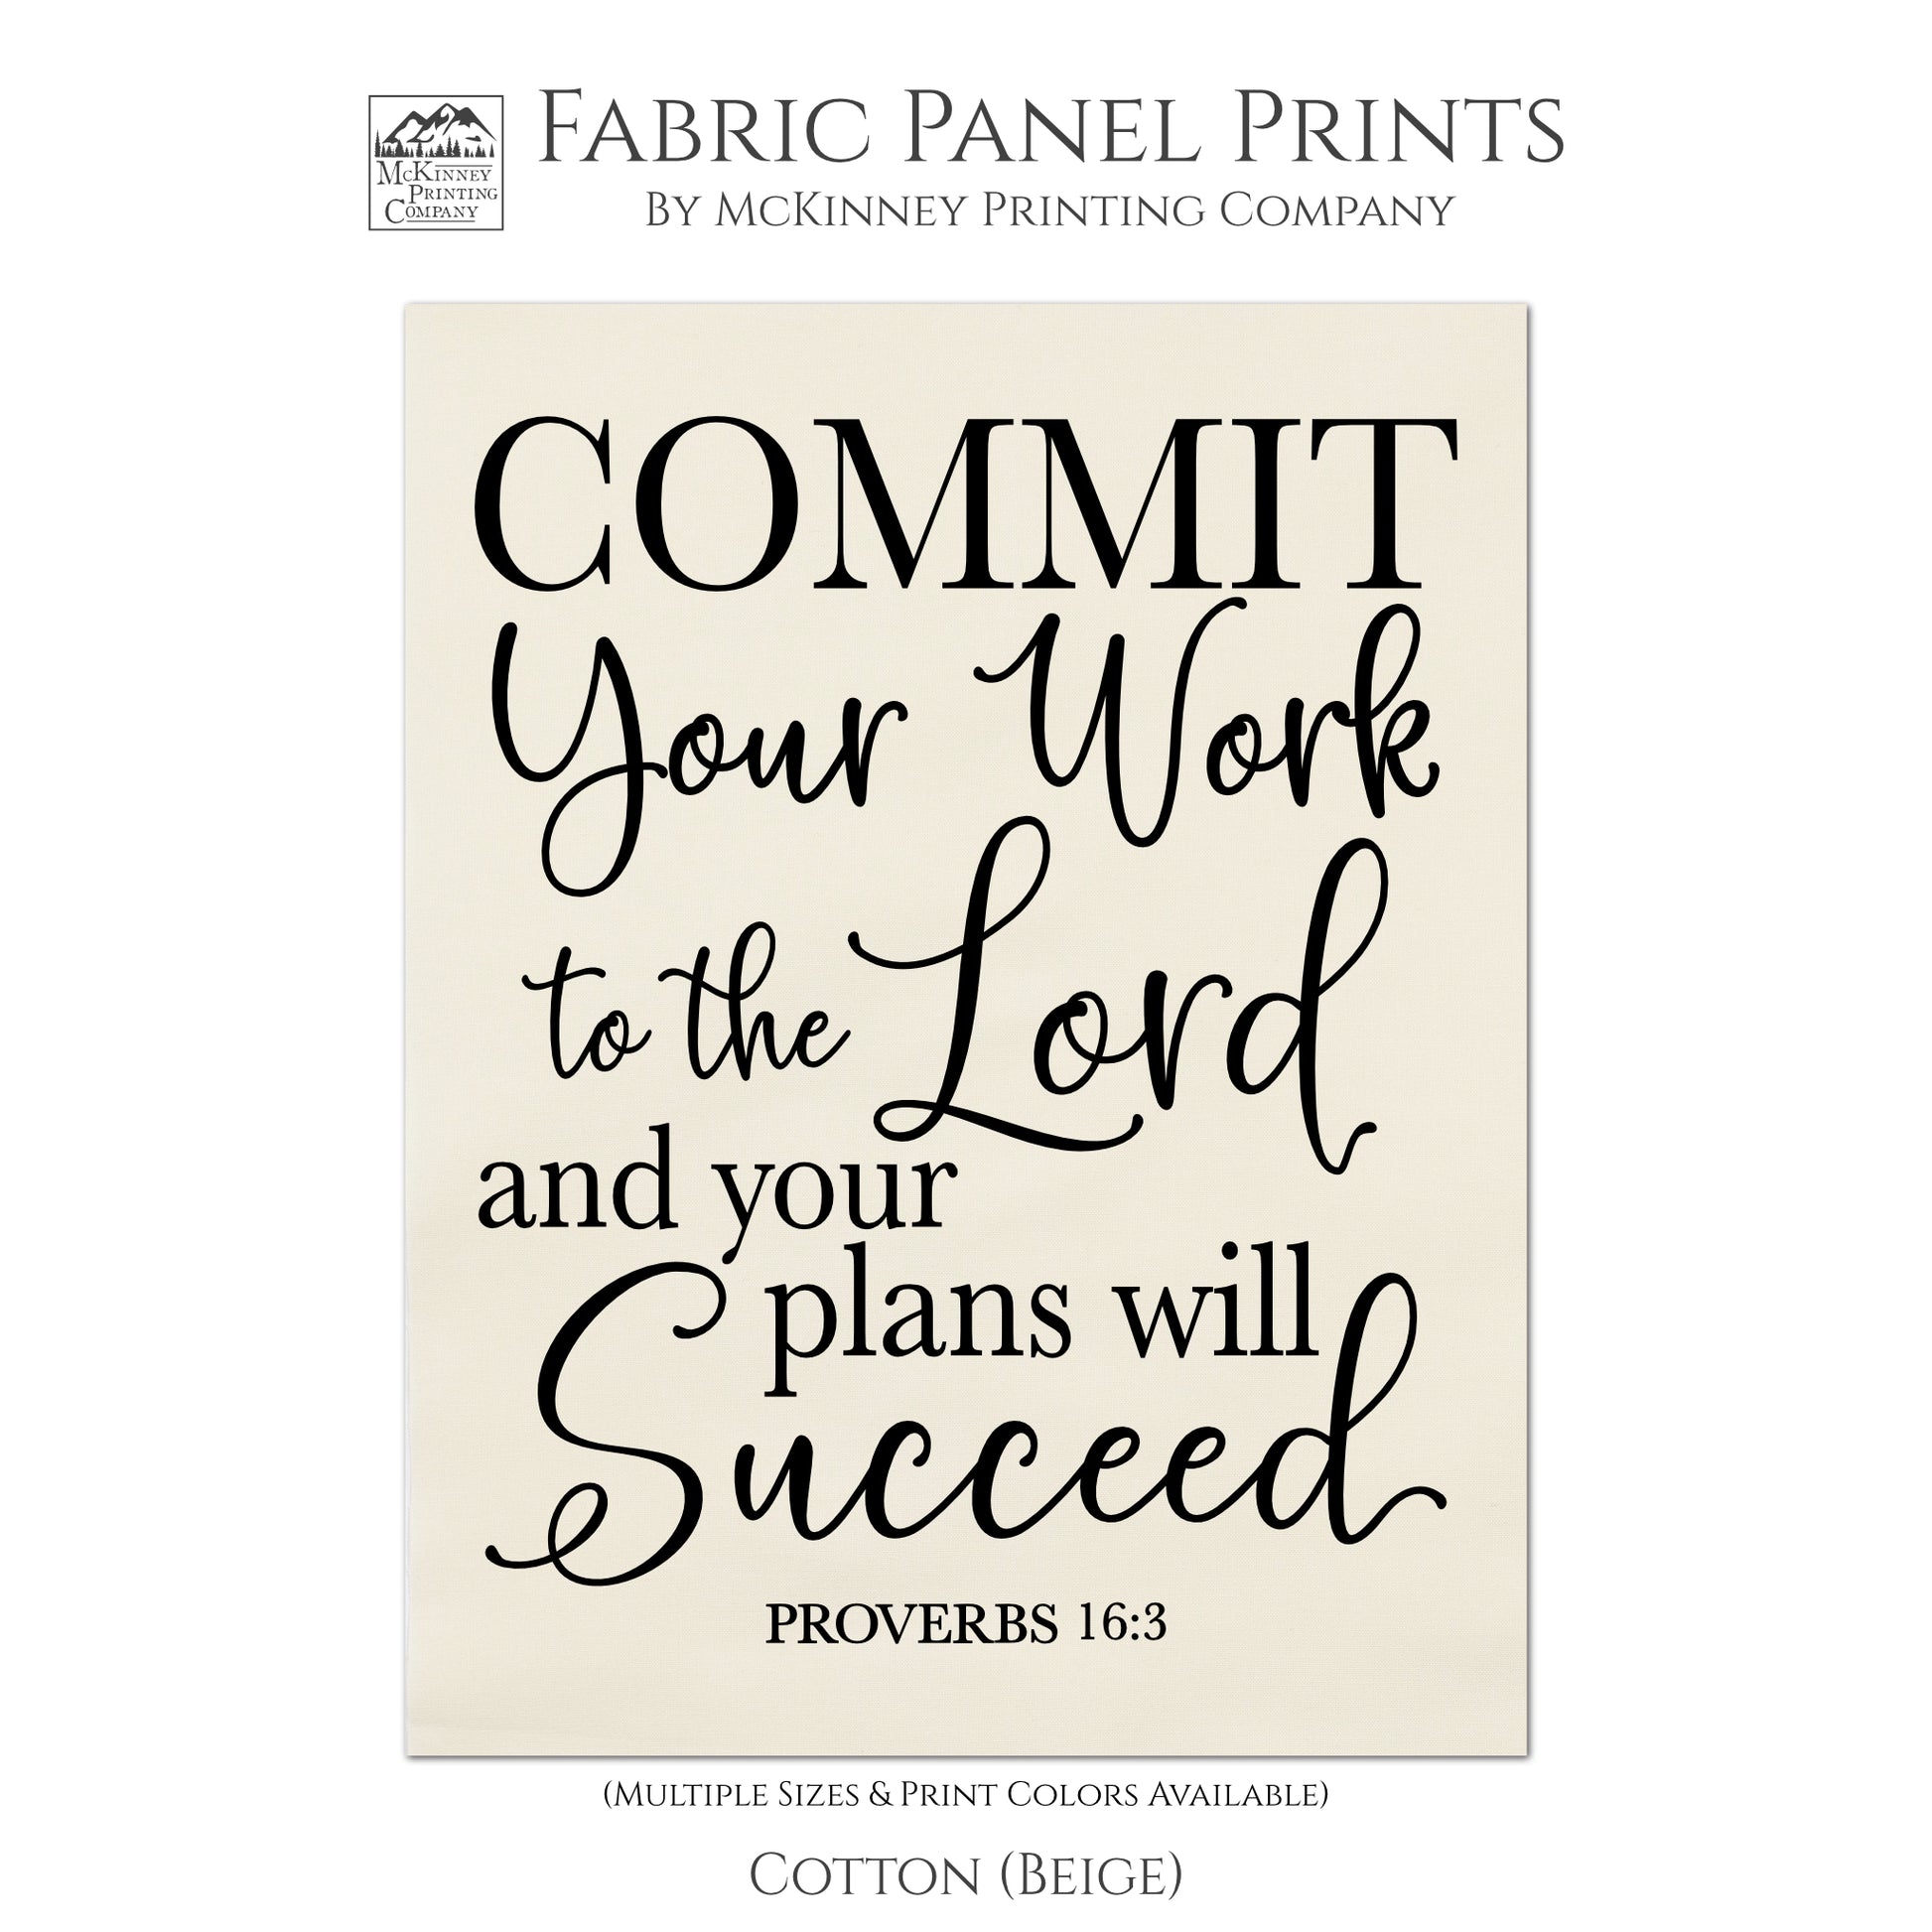 Commit you work to the Lord and you plans will succeed. - Proverbs 16:3, Fabric Panel Print, Quilt Block, Scripture Fabric - Cotton